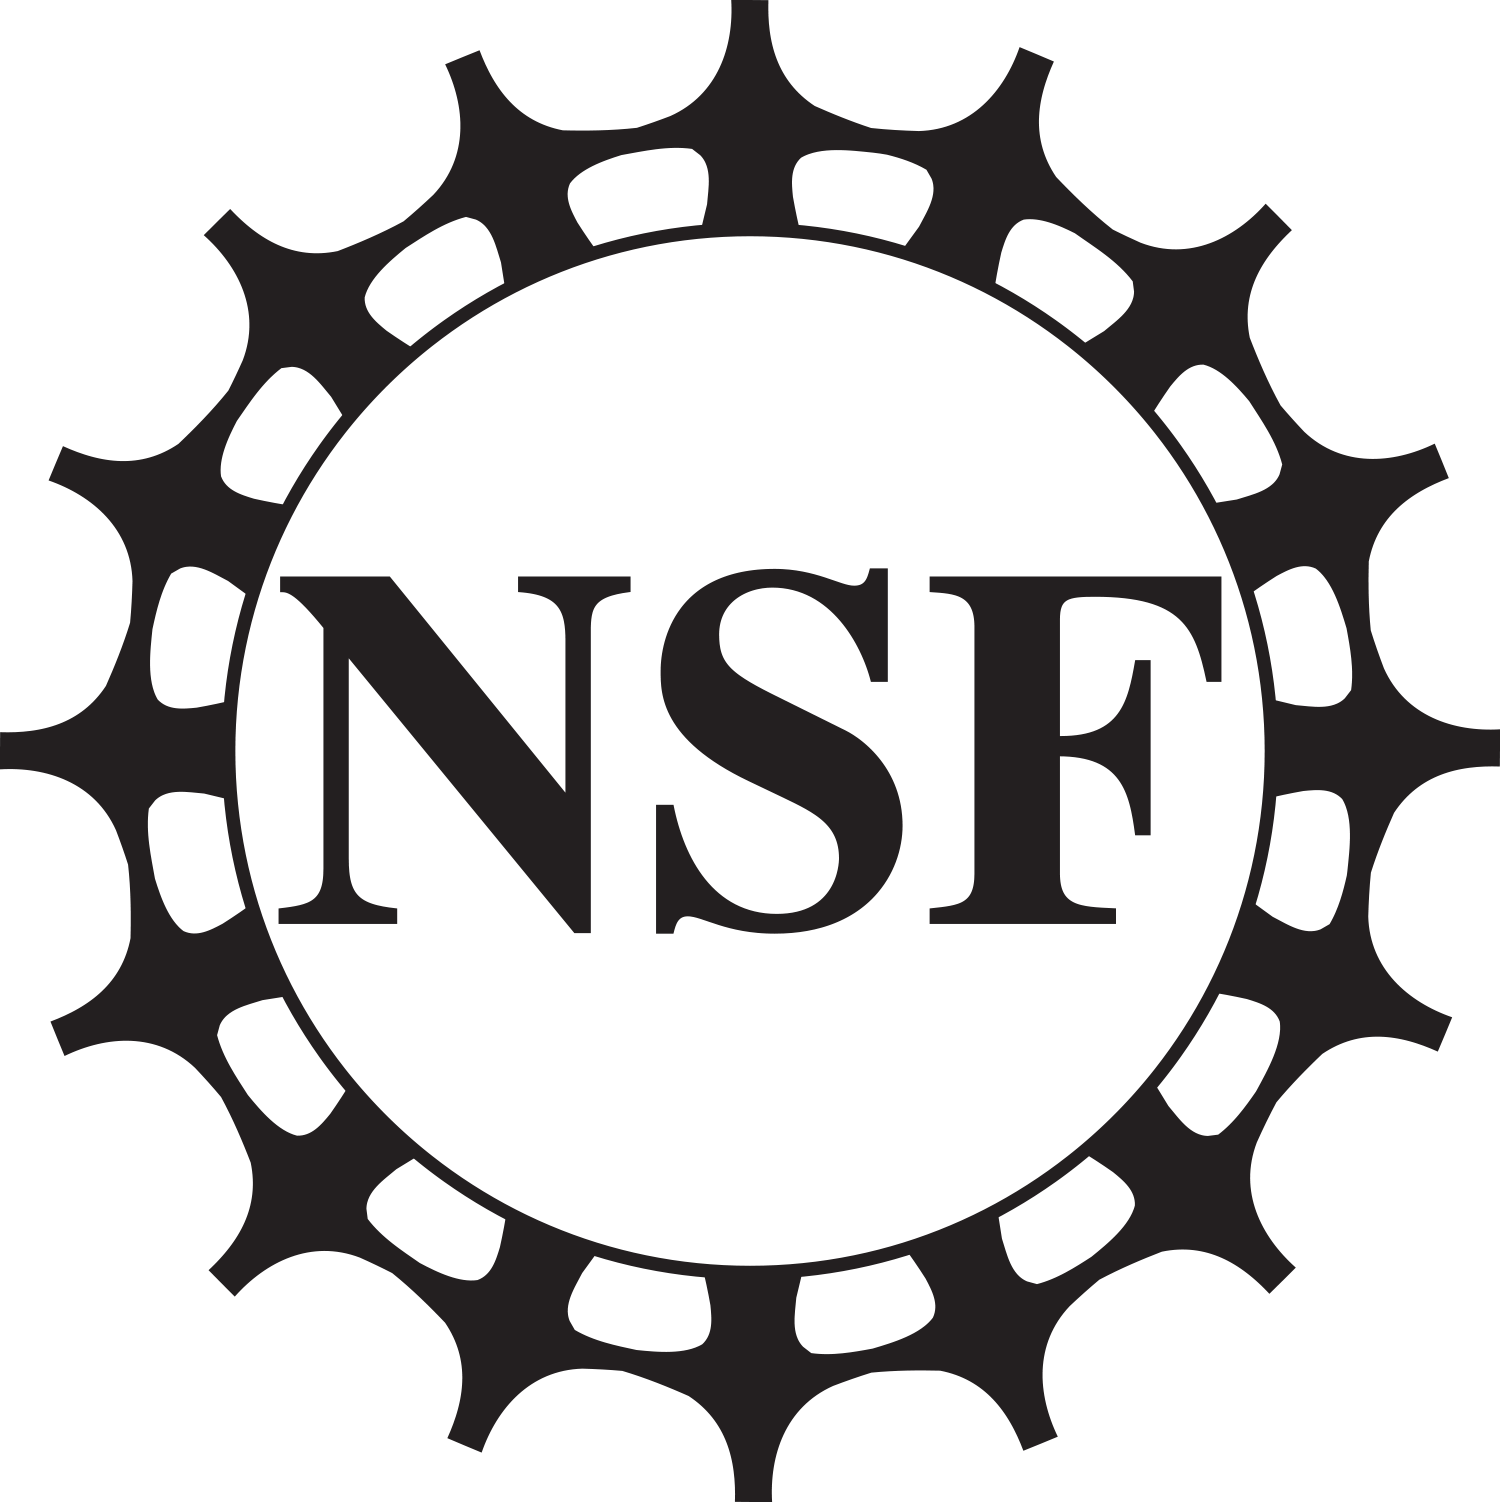 Easy to Draw Black and White Vector Logo - NSF Logo | NSF - National Science Foundation